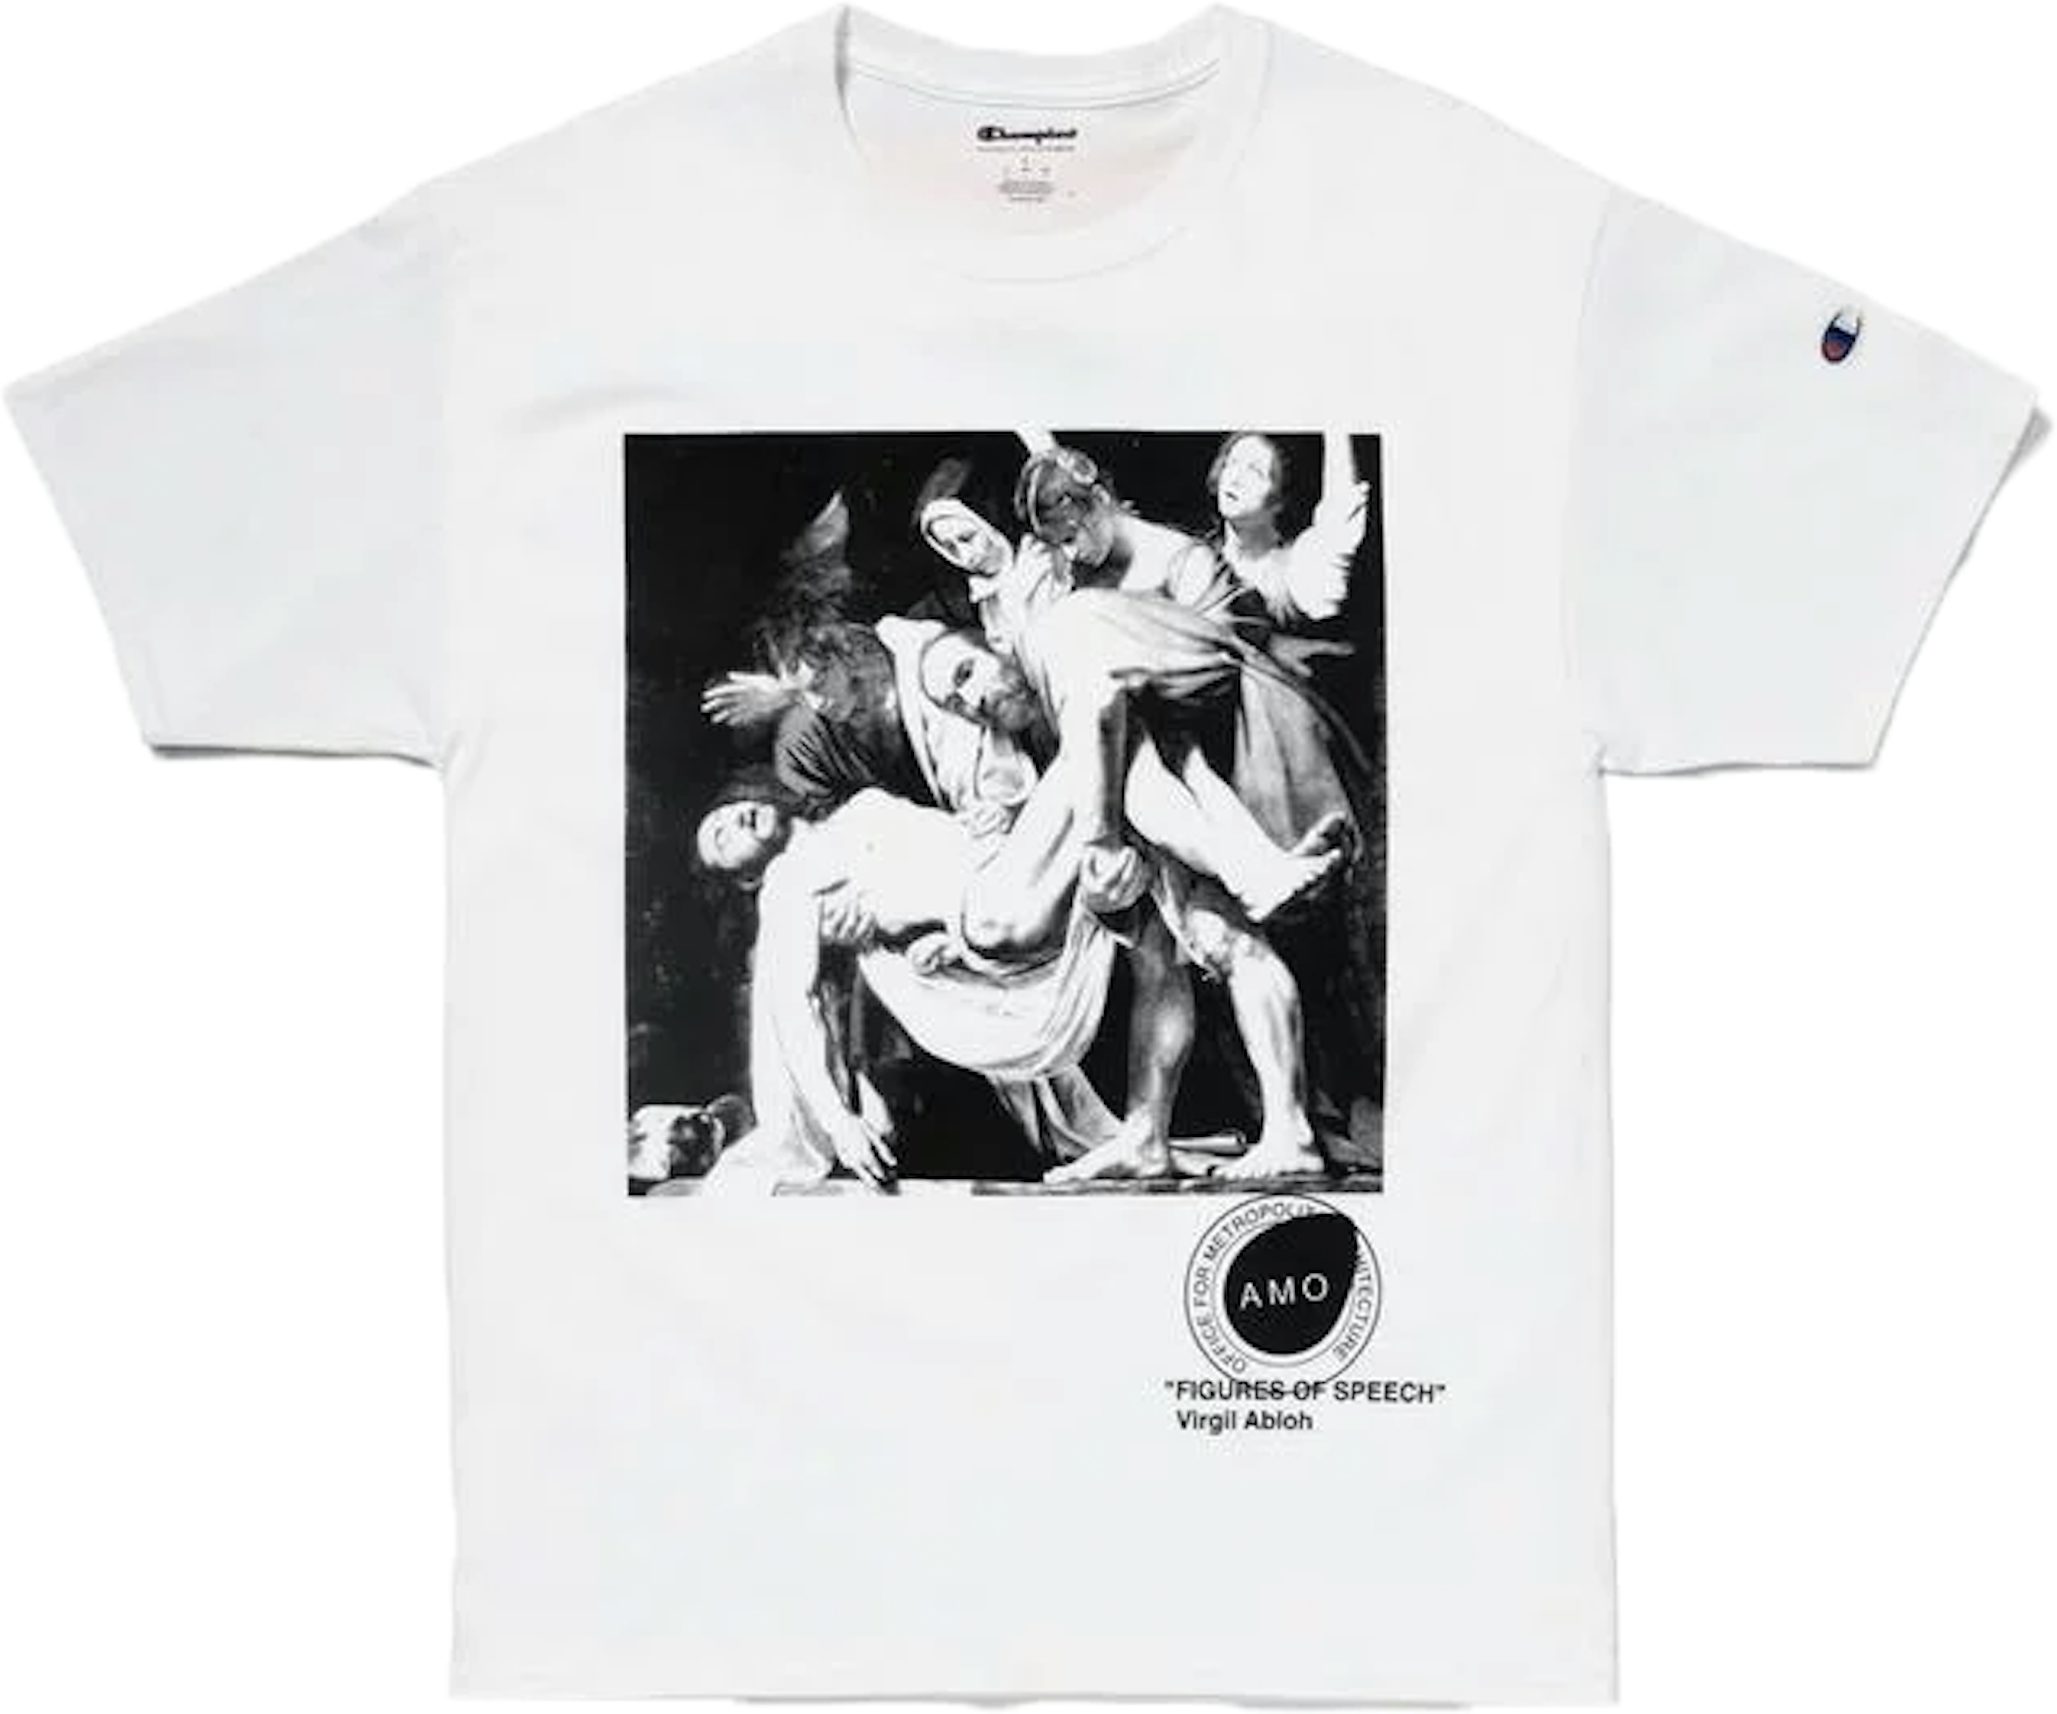 Off-White™ Black Spring Summer 2019 Tee Shirt size S